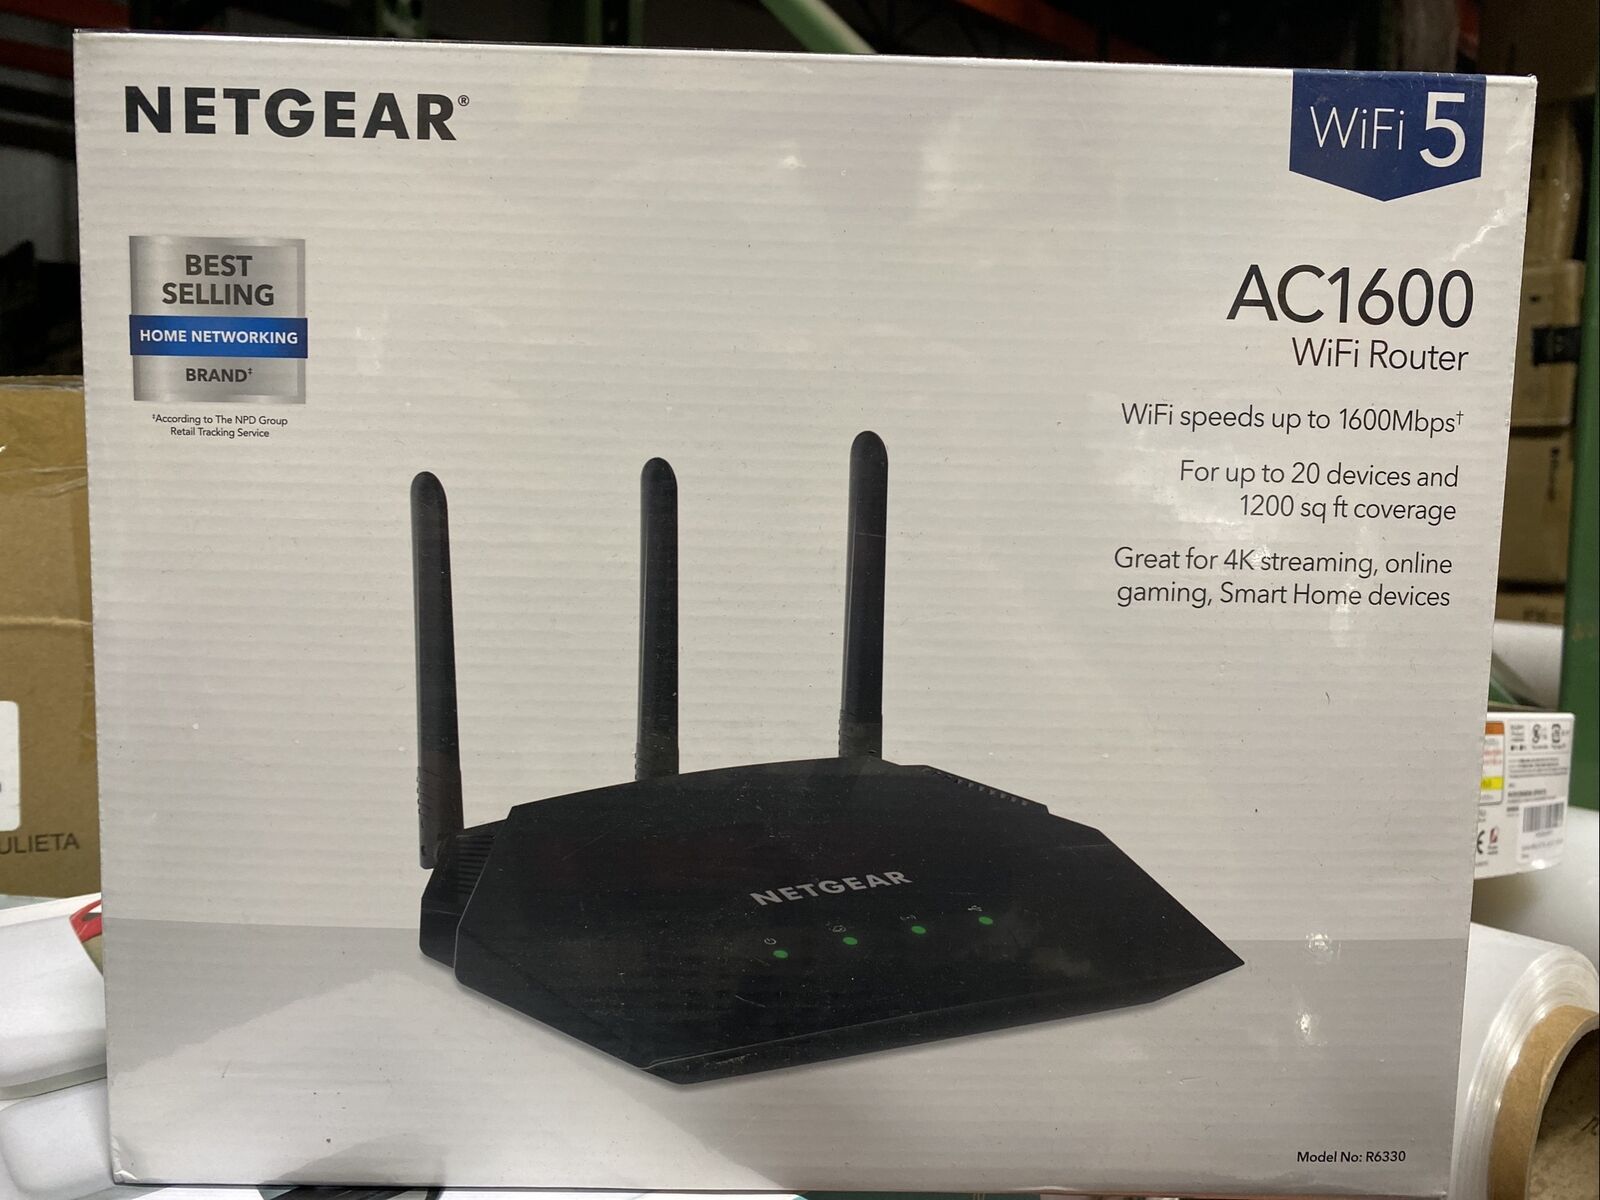 NETGEAR WiFi Router R6330 - AC1600 Dual Band Wireless Speed up to 1600 Mbps | Up